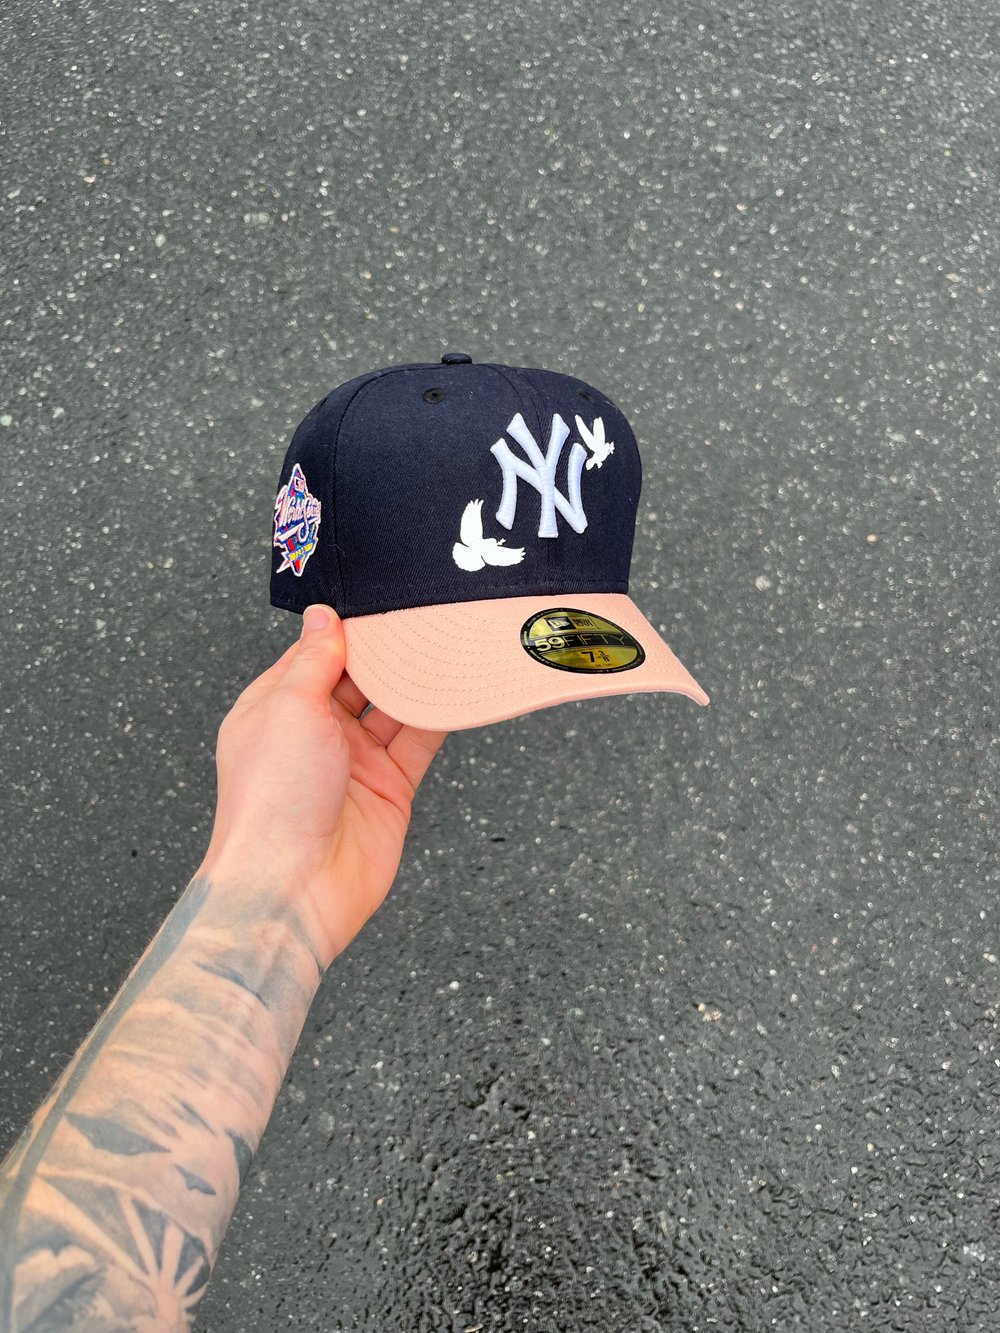 New York Yankees Hats & Caps  Fitted hats, Swag hats, Custom fitted hats